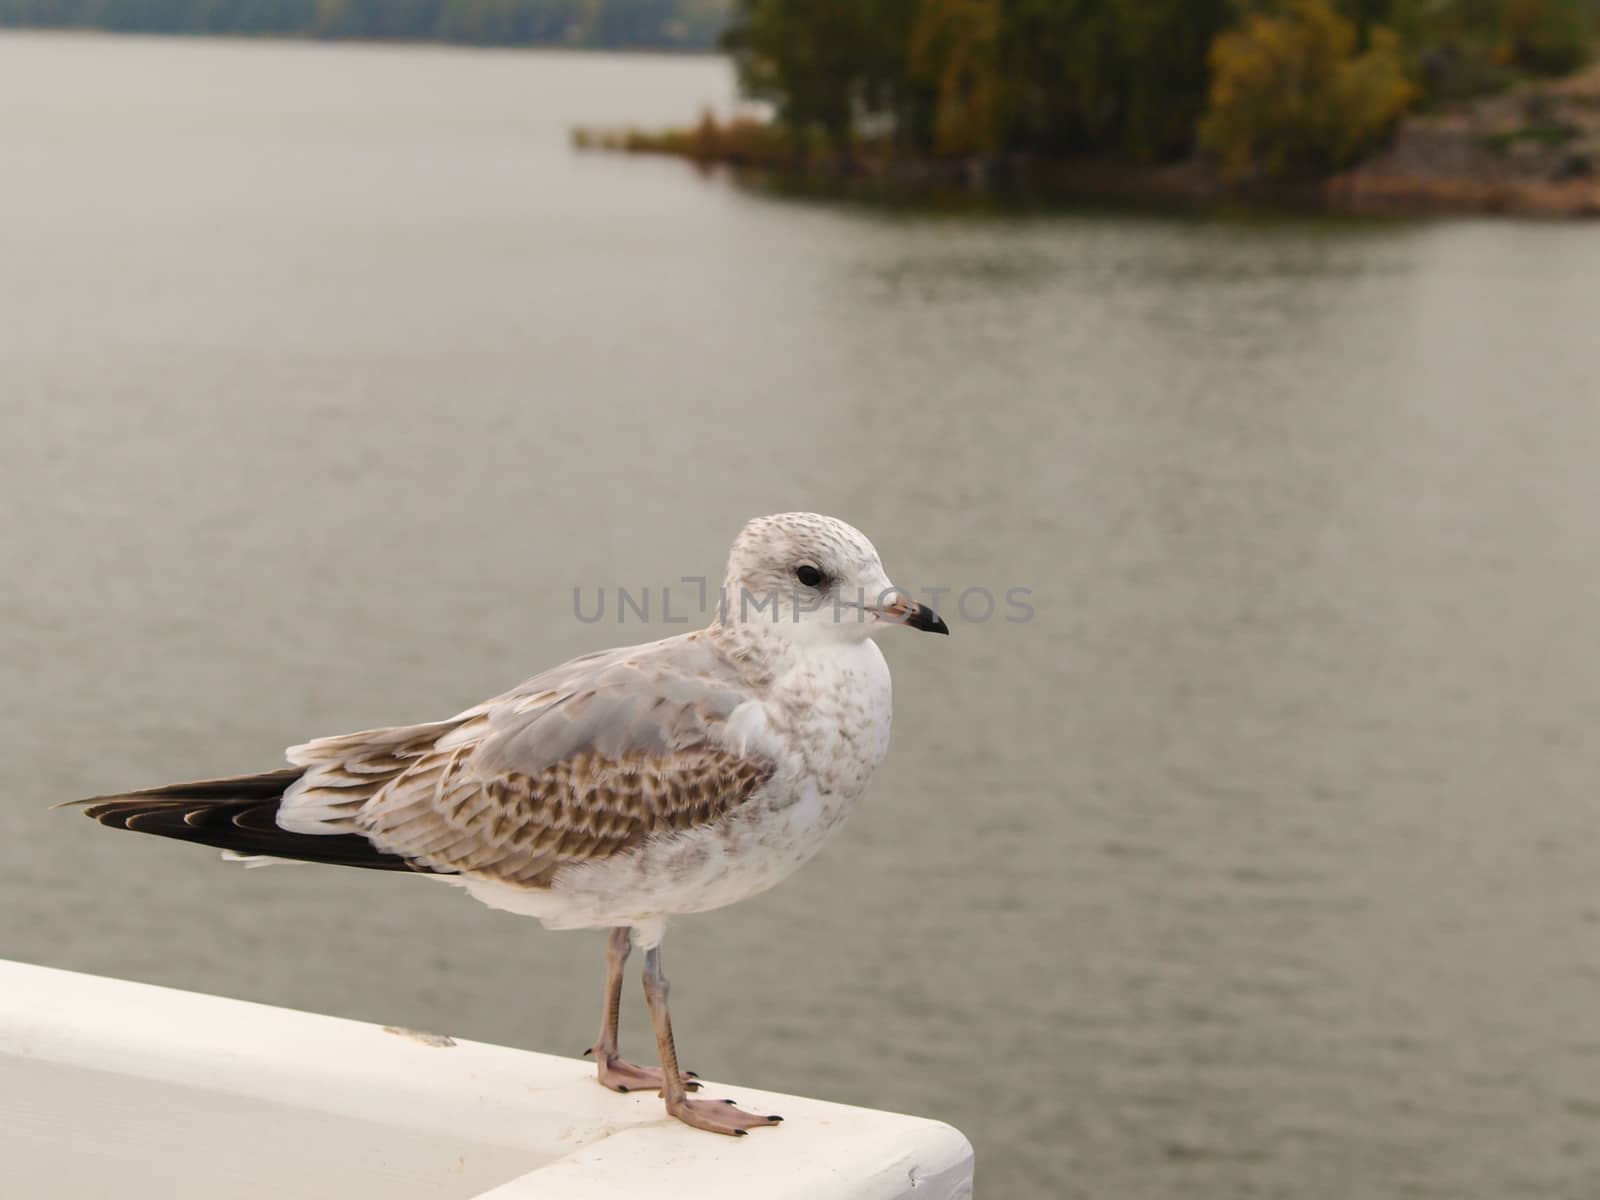 Young herring seagull standing on a white wall in front of shimmering water